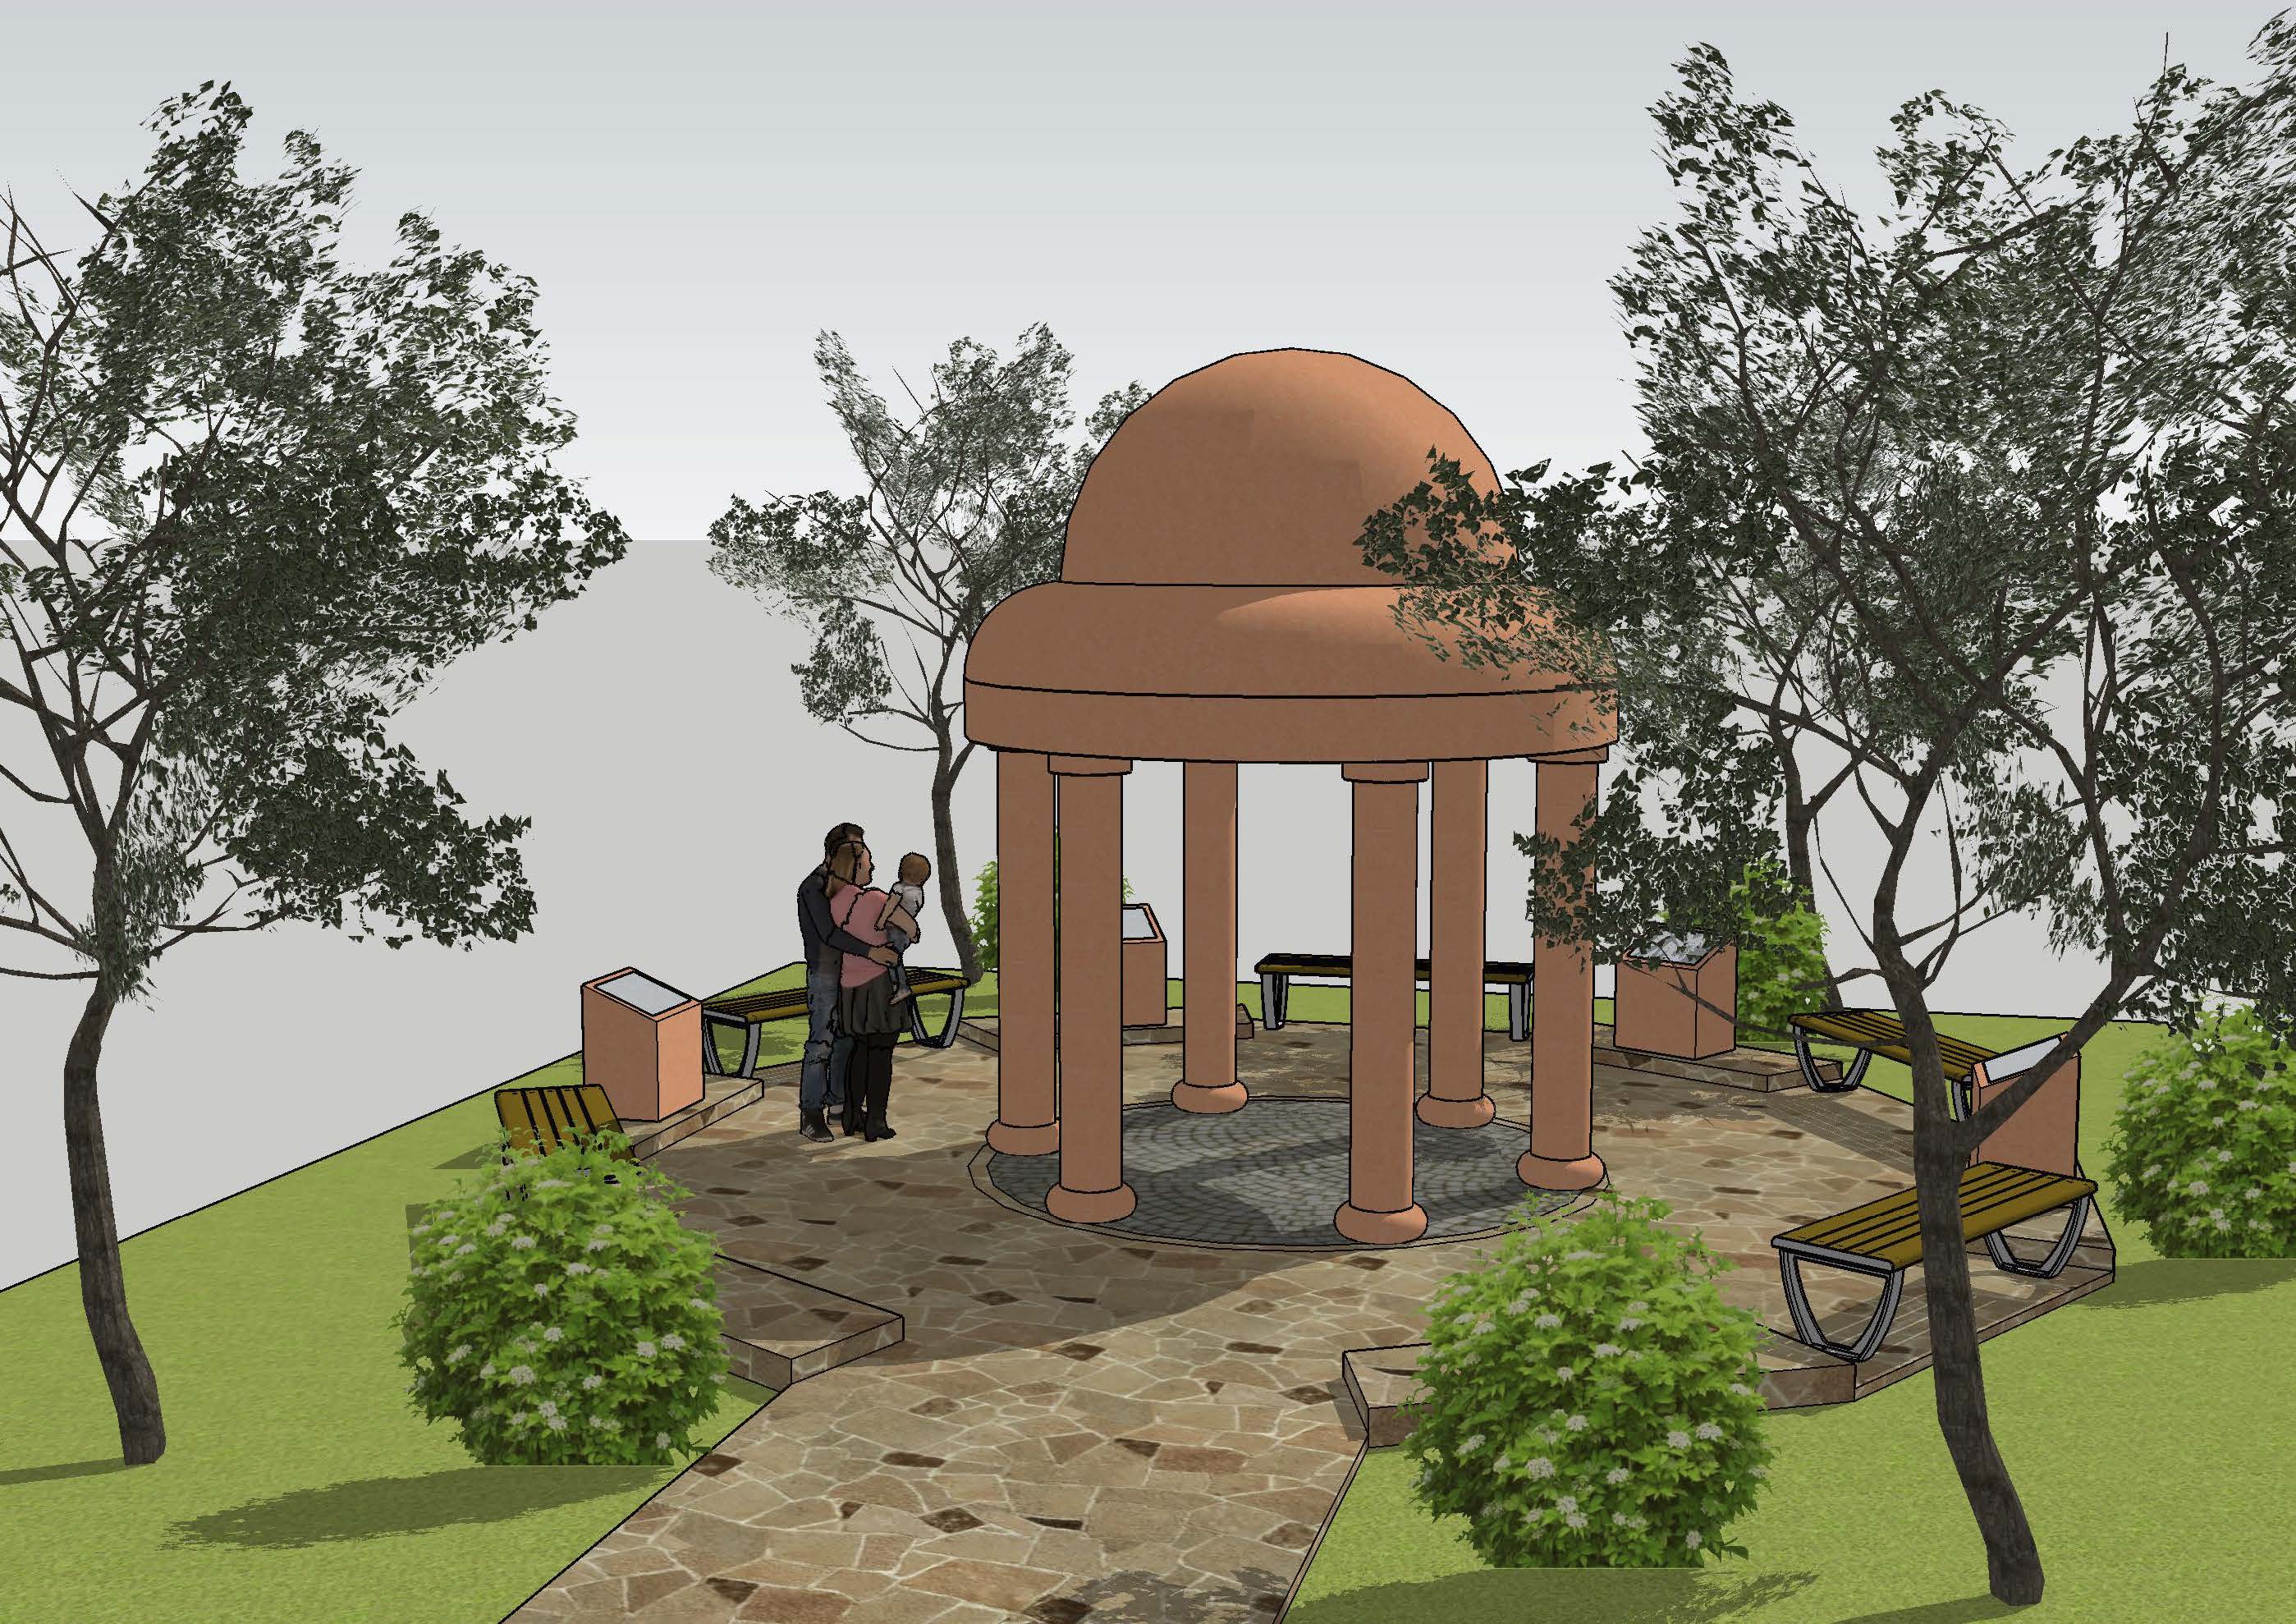 The memorial will include a dome design for the roof and natural stone columns.